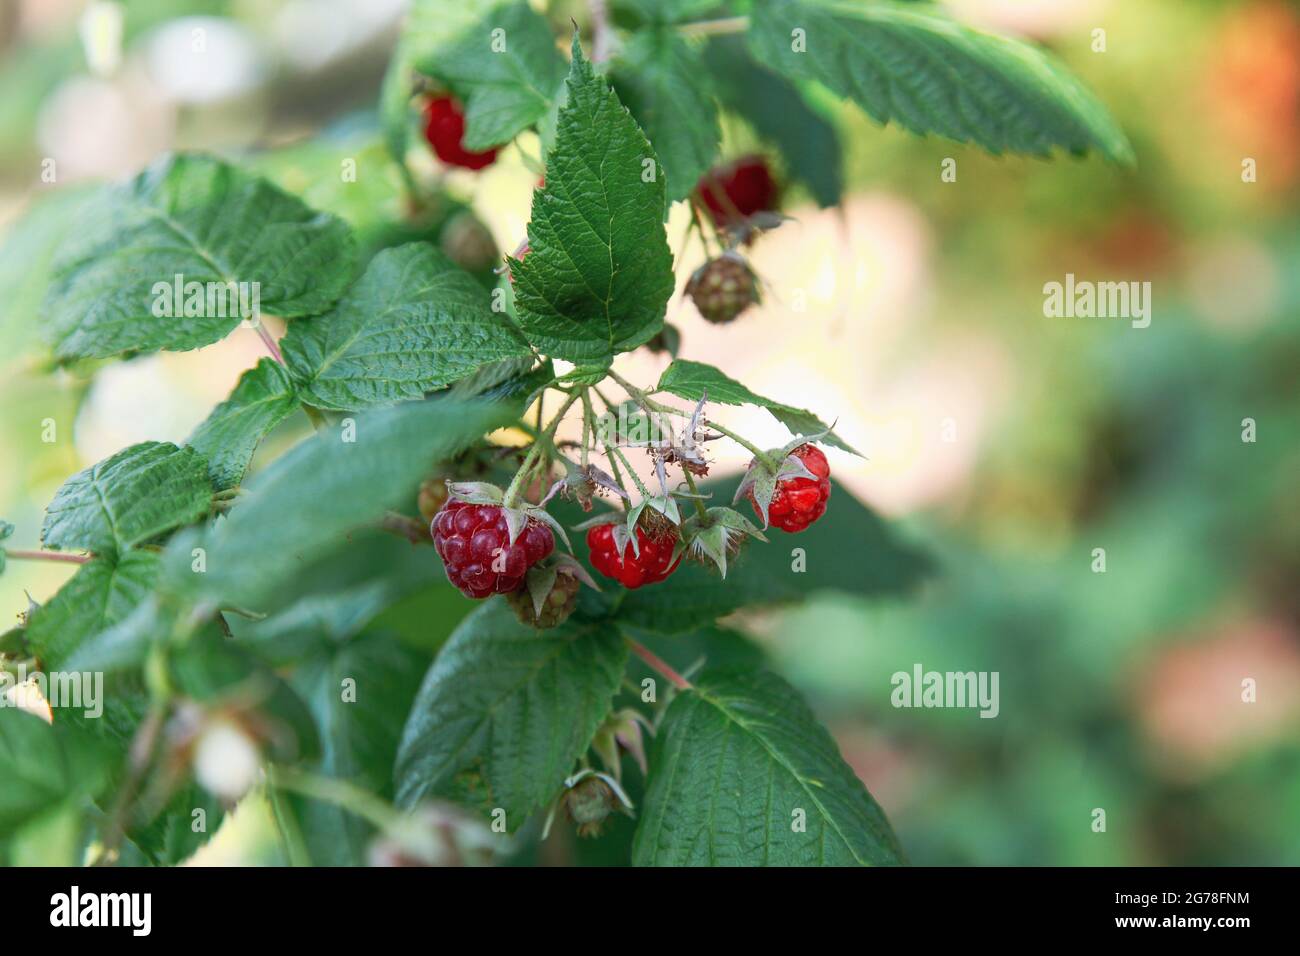 Raspberries, organic gardening, cultivation, summer, self-sufficiency, green, red, still life, healthy Stock Photo